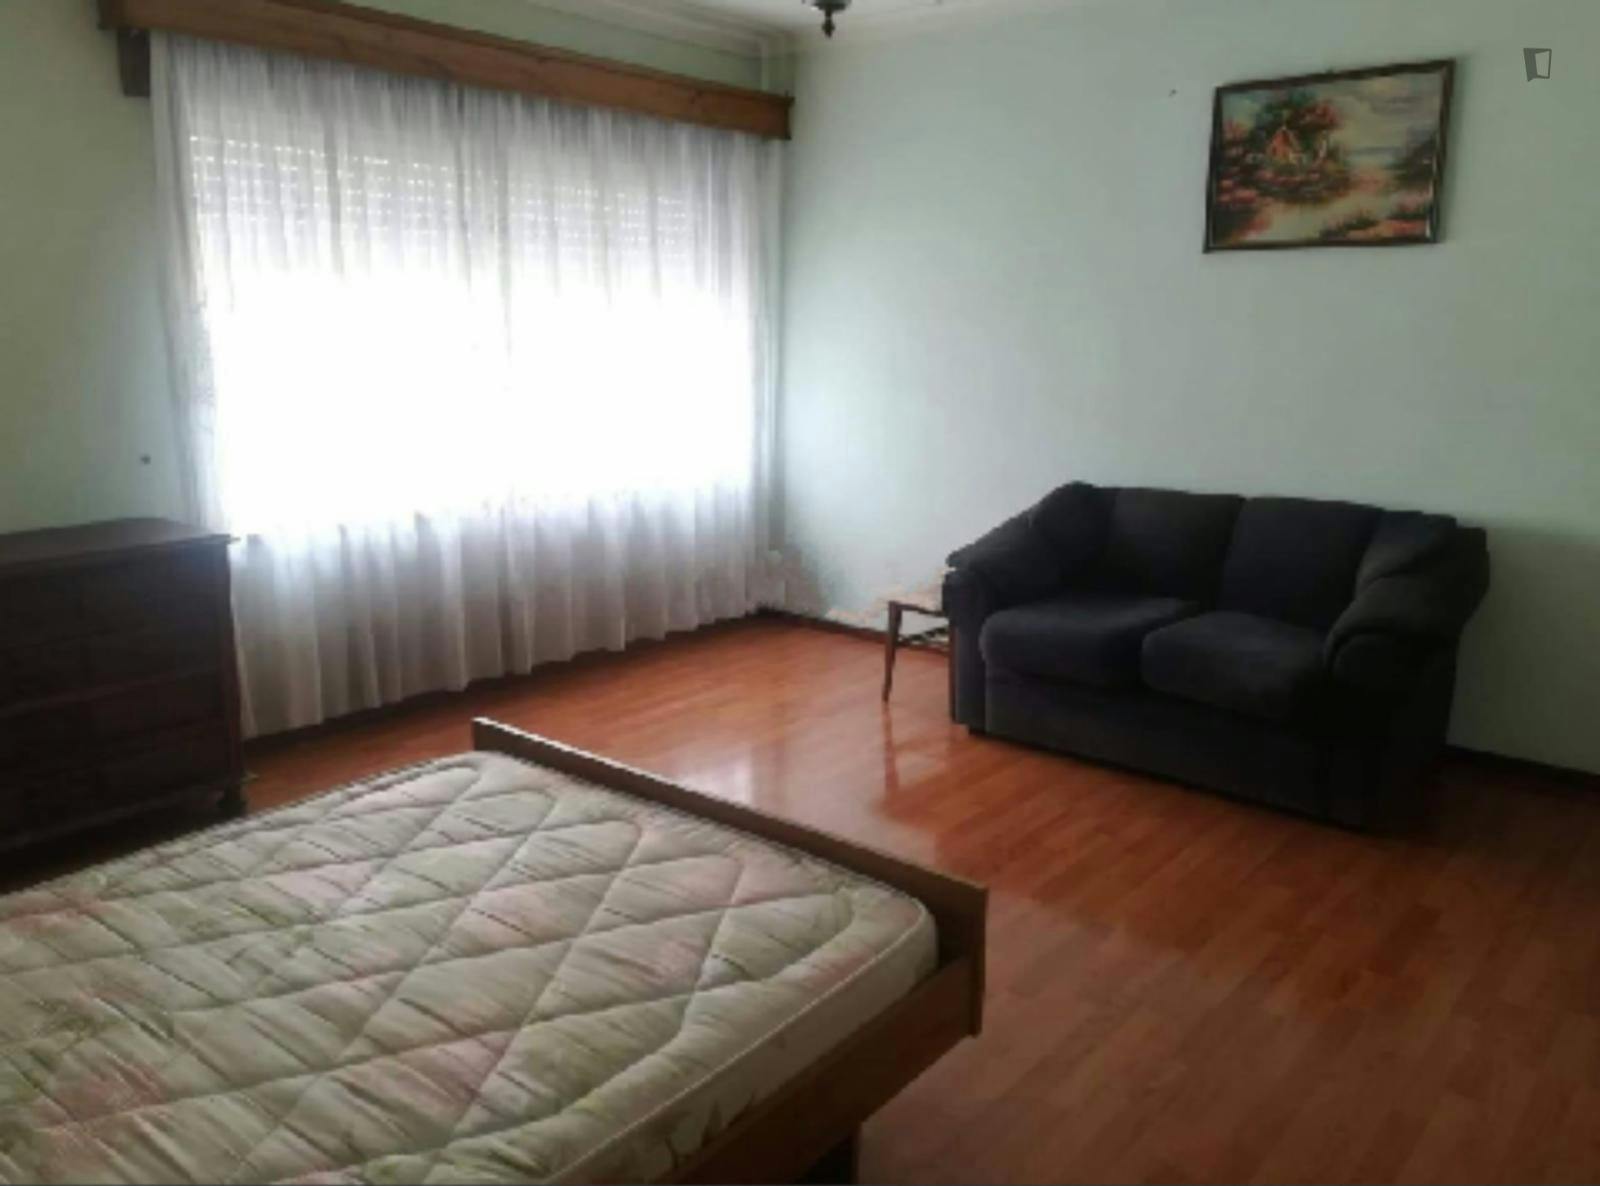 Spacious single bedroom close to Polytechnic Institute of Cávado and Ave